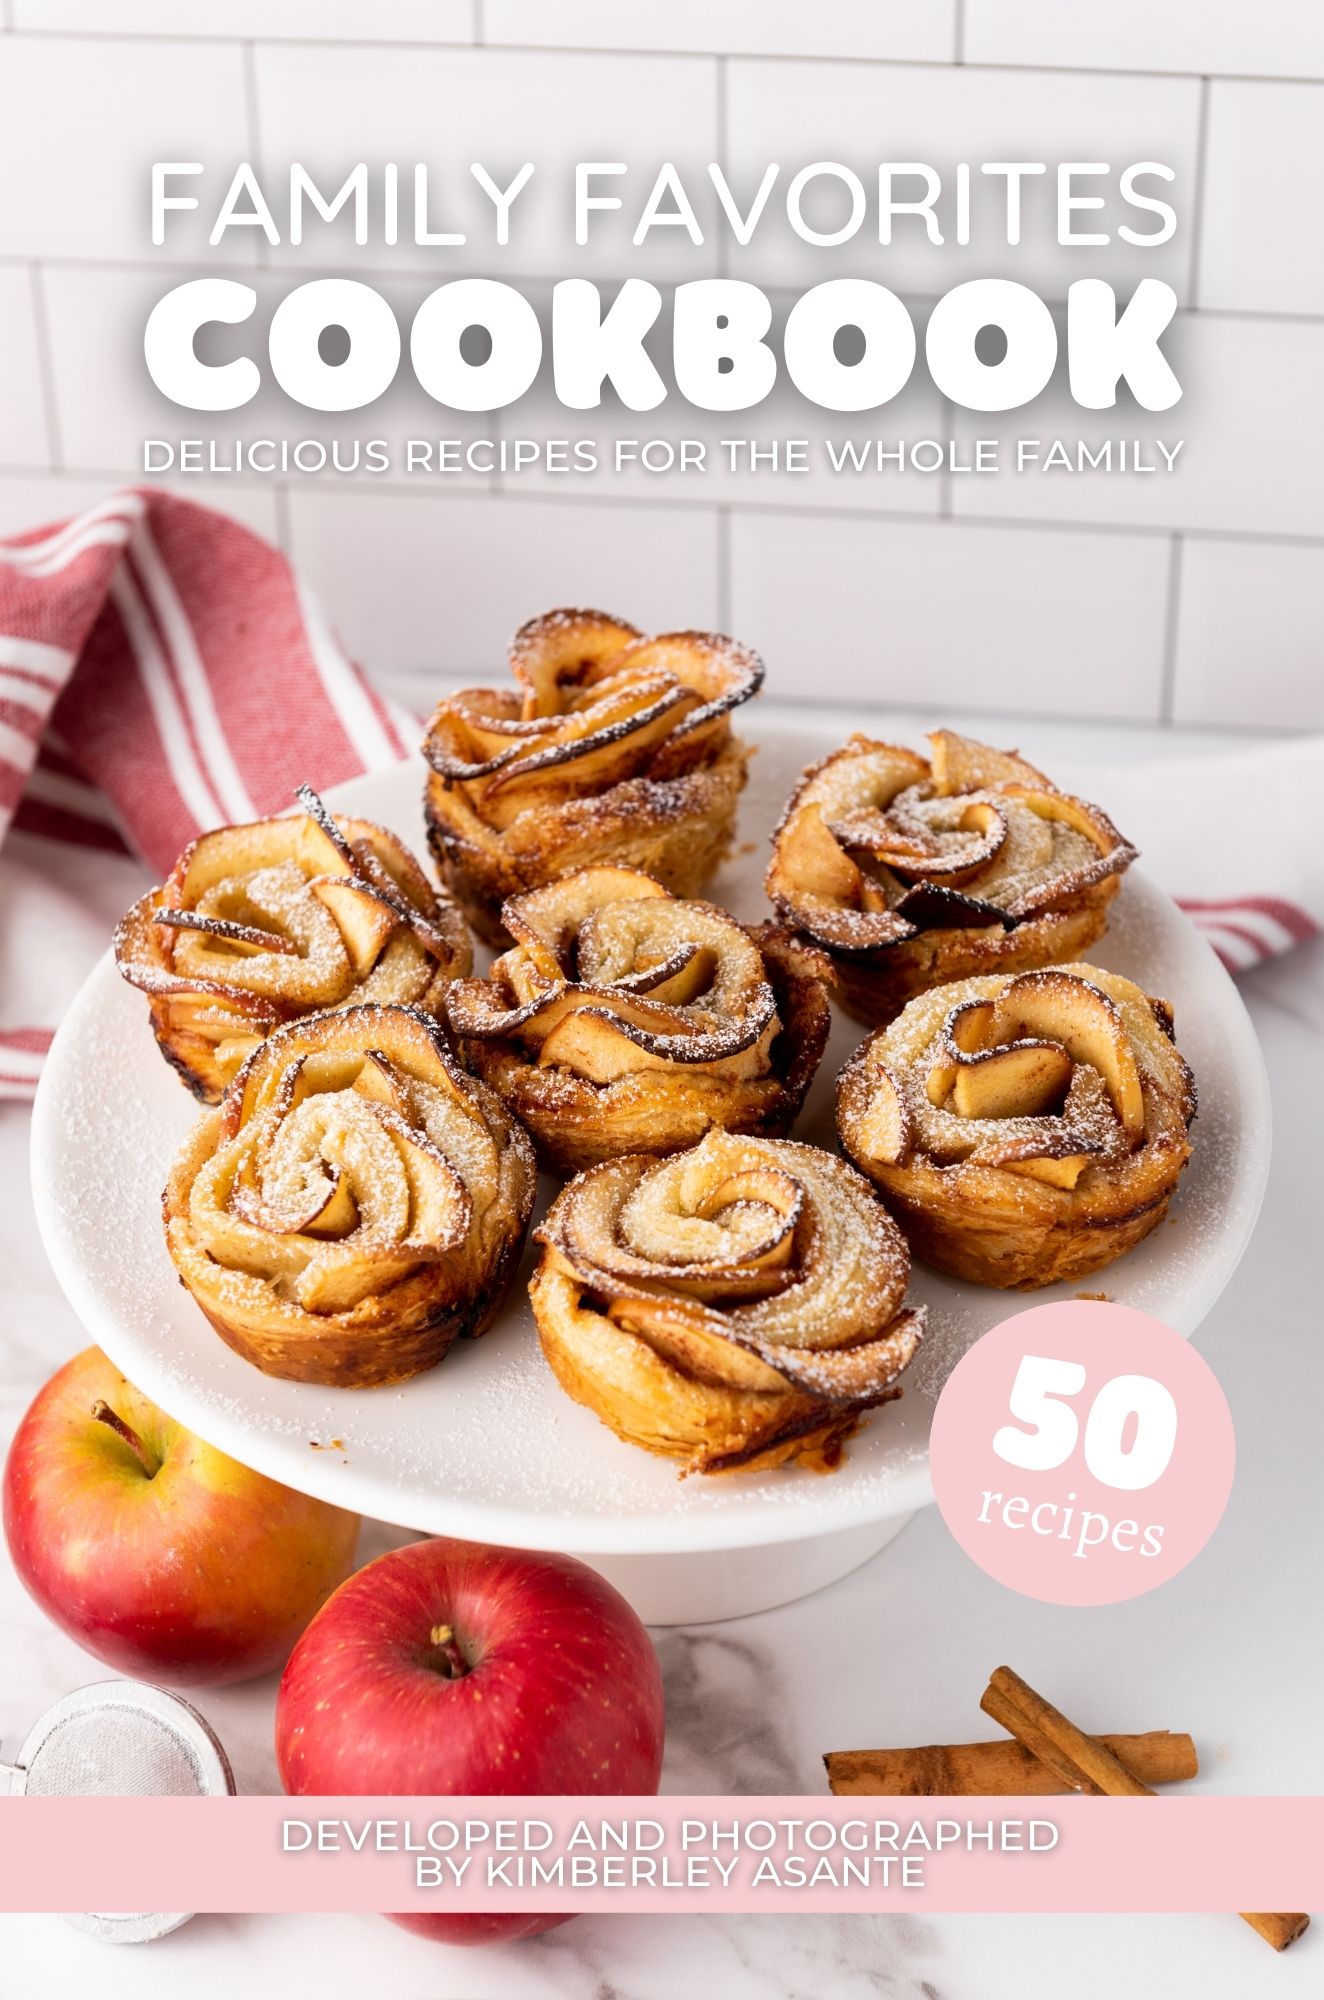 From Our Kitchen to Yours: ‘Family Favorites Cookbook’ Is Here!